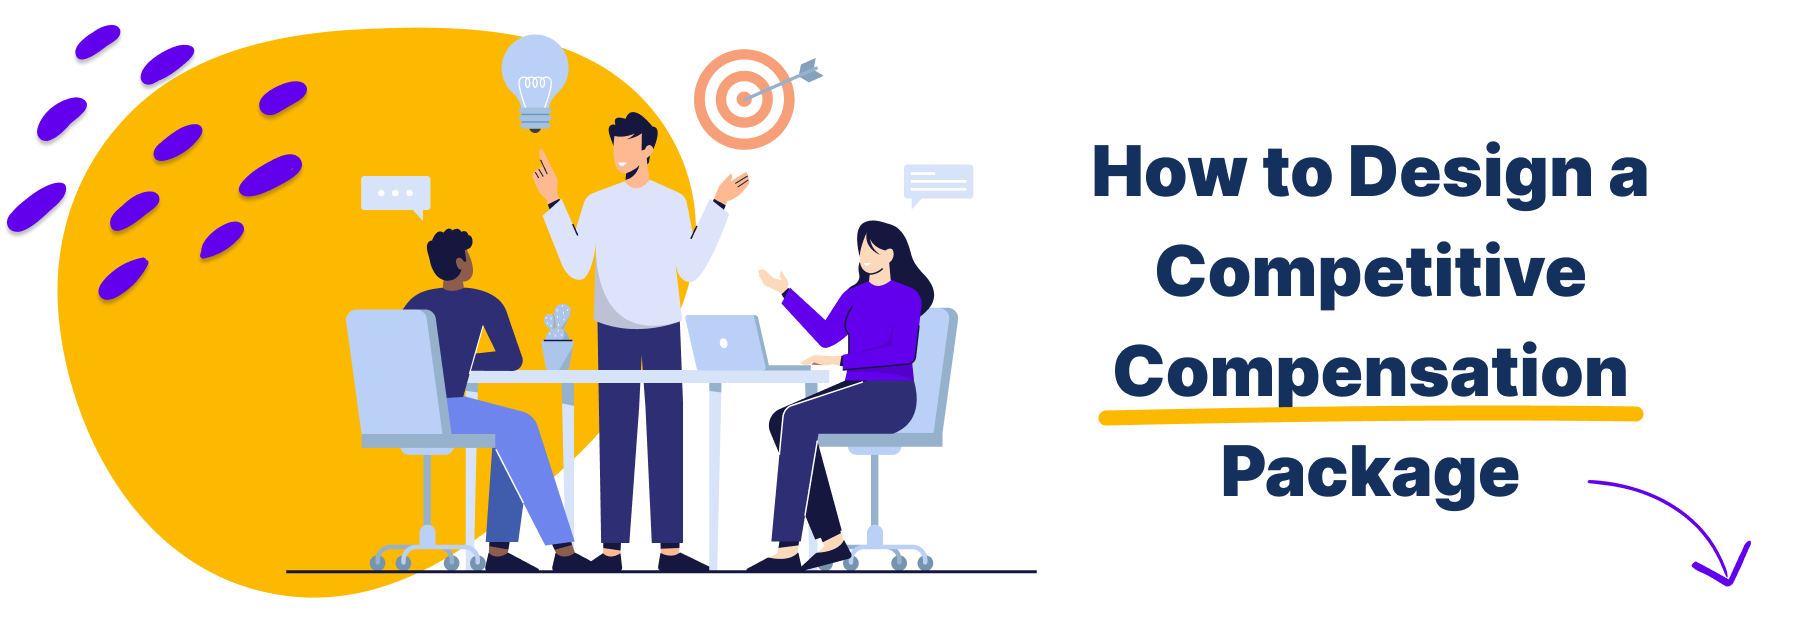 How To Design A Competitive Compensation Package Cover